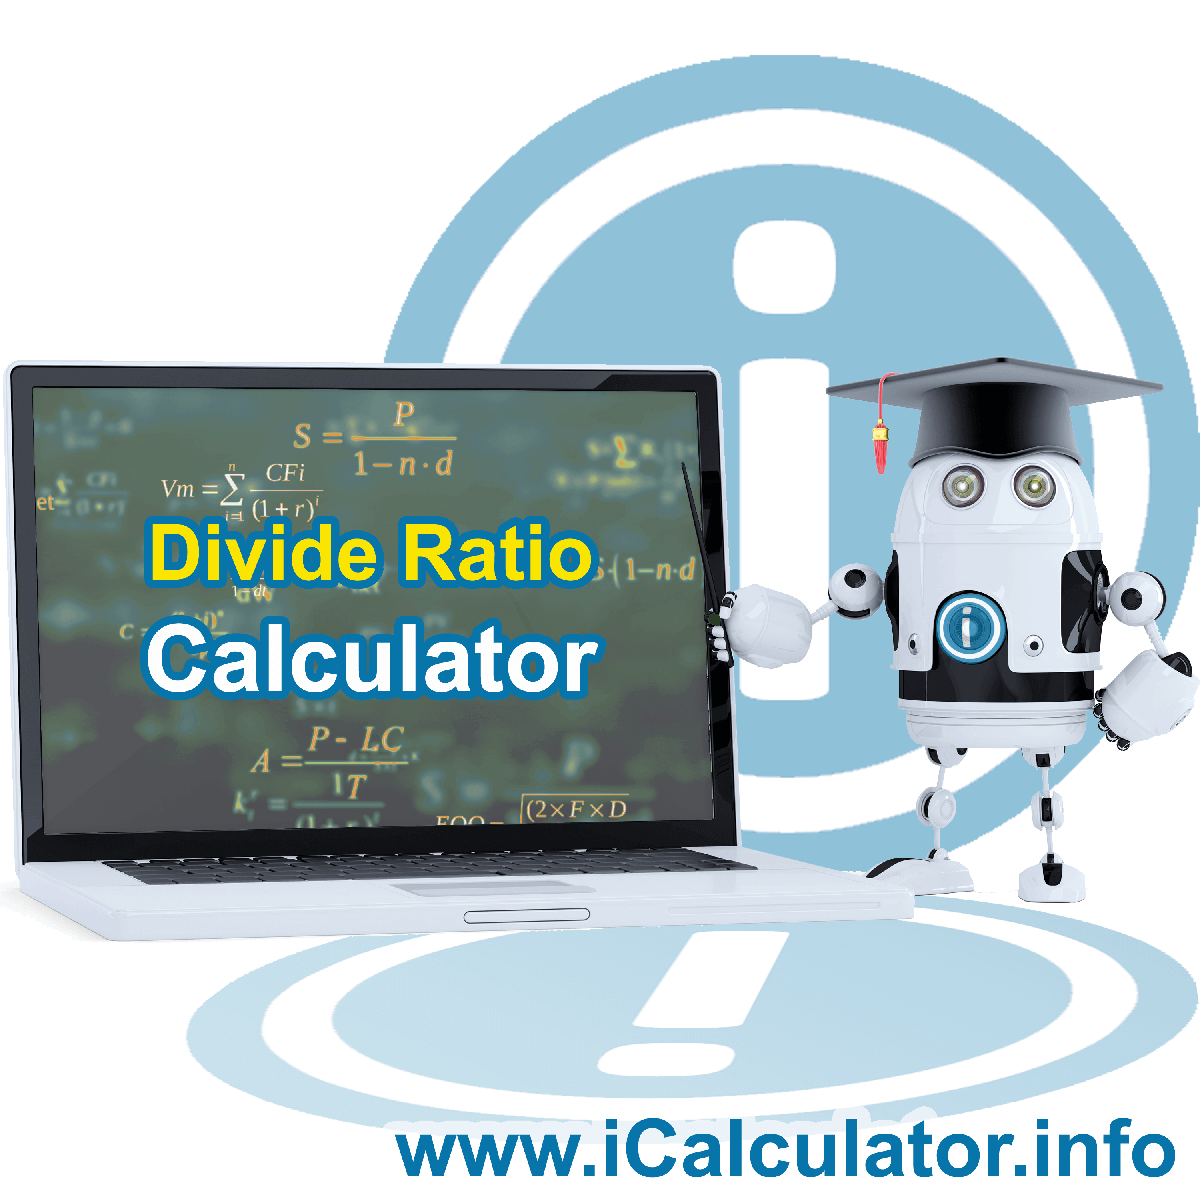 Divide Ratio. This image shows the properties and divide ratio formula for the Divide Ratio